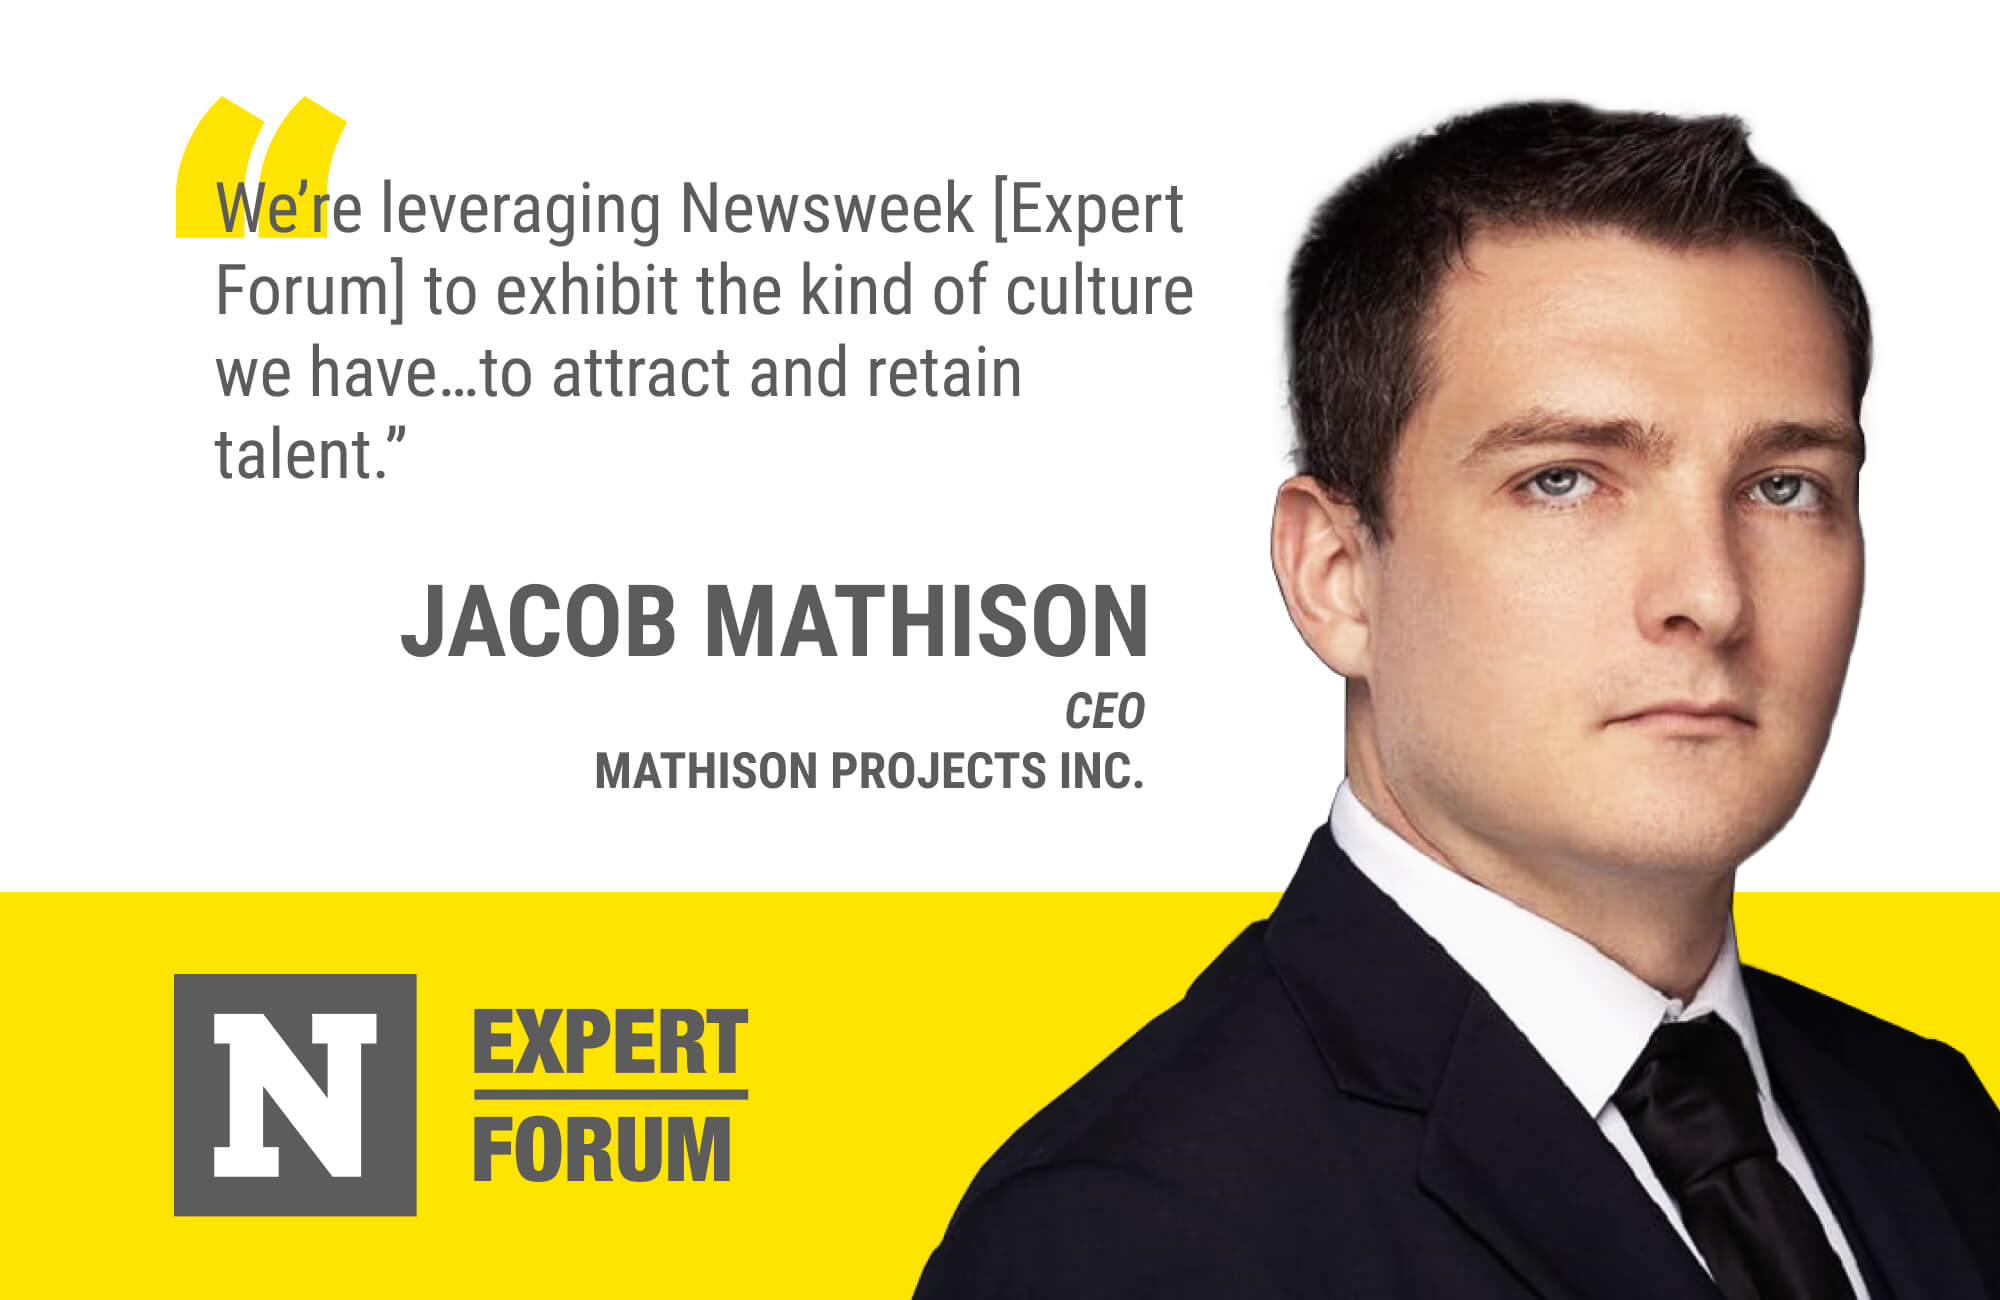 For Jacob Mathison, Newsweek Expert Forum is an Effective Recruiting and Retention Tool